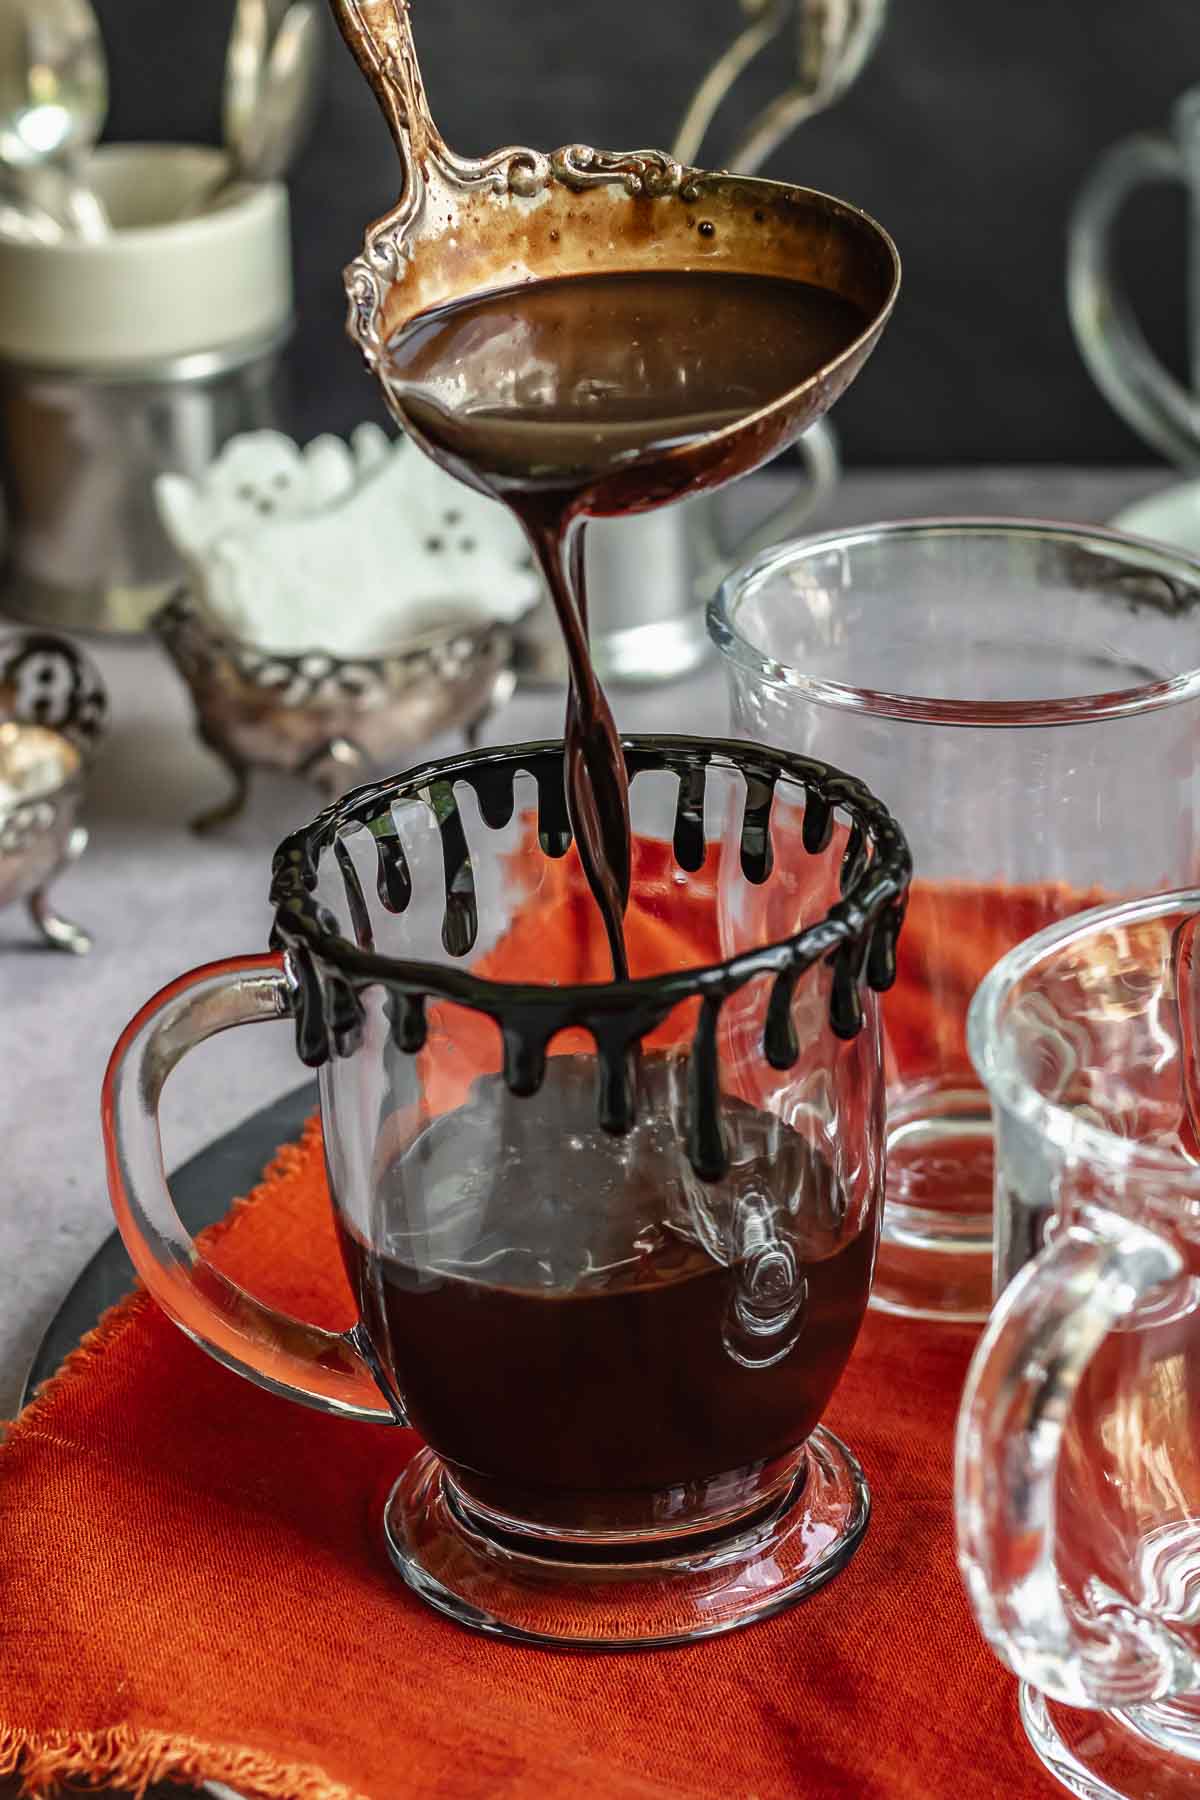 A ladle adds Halloween hot chocolate into a decorated glass mug.